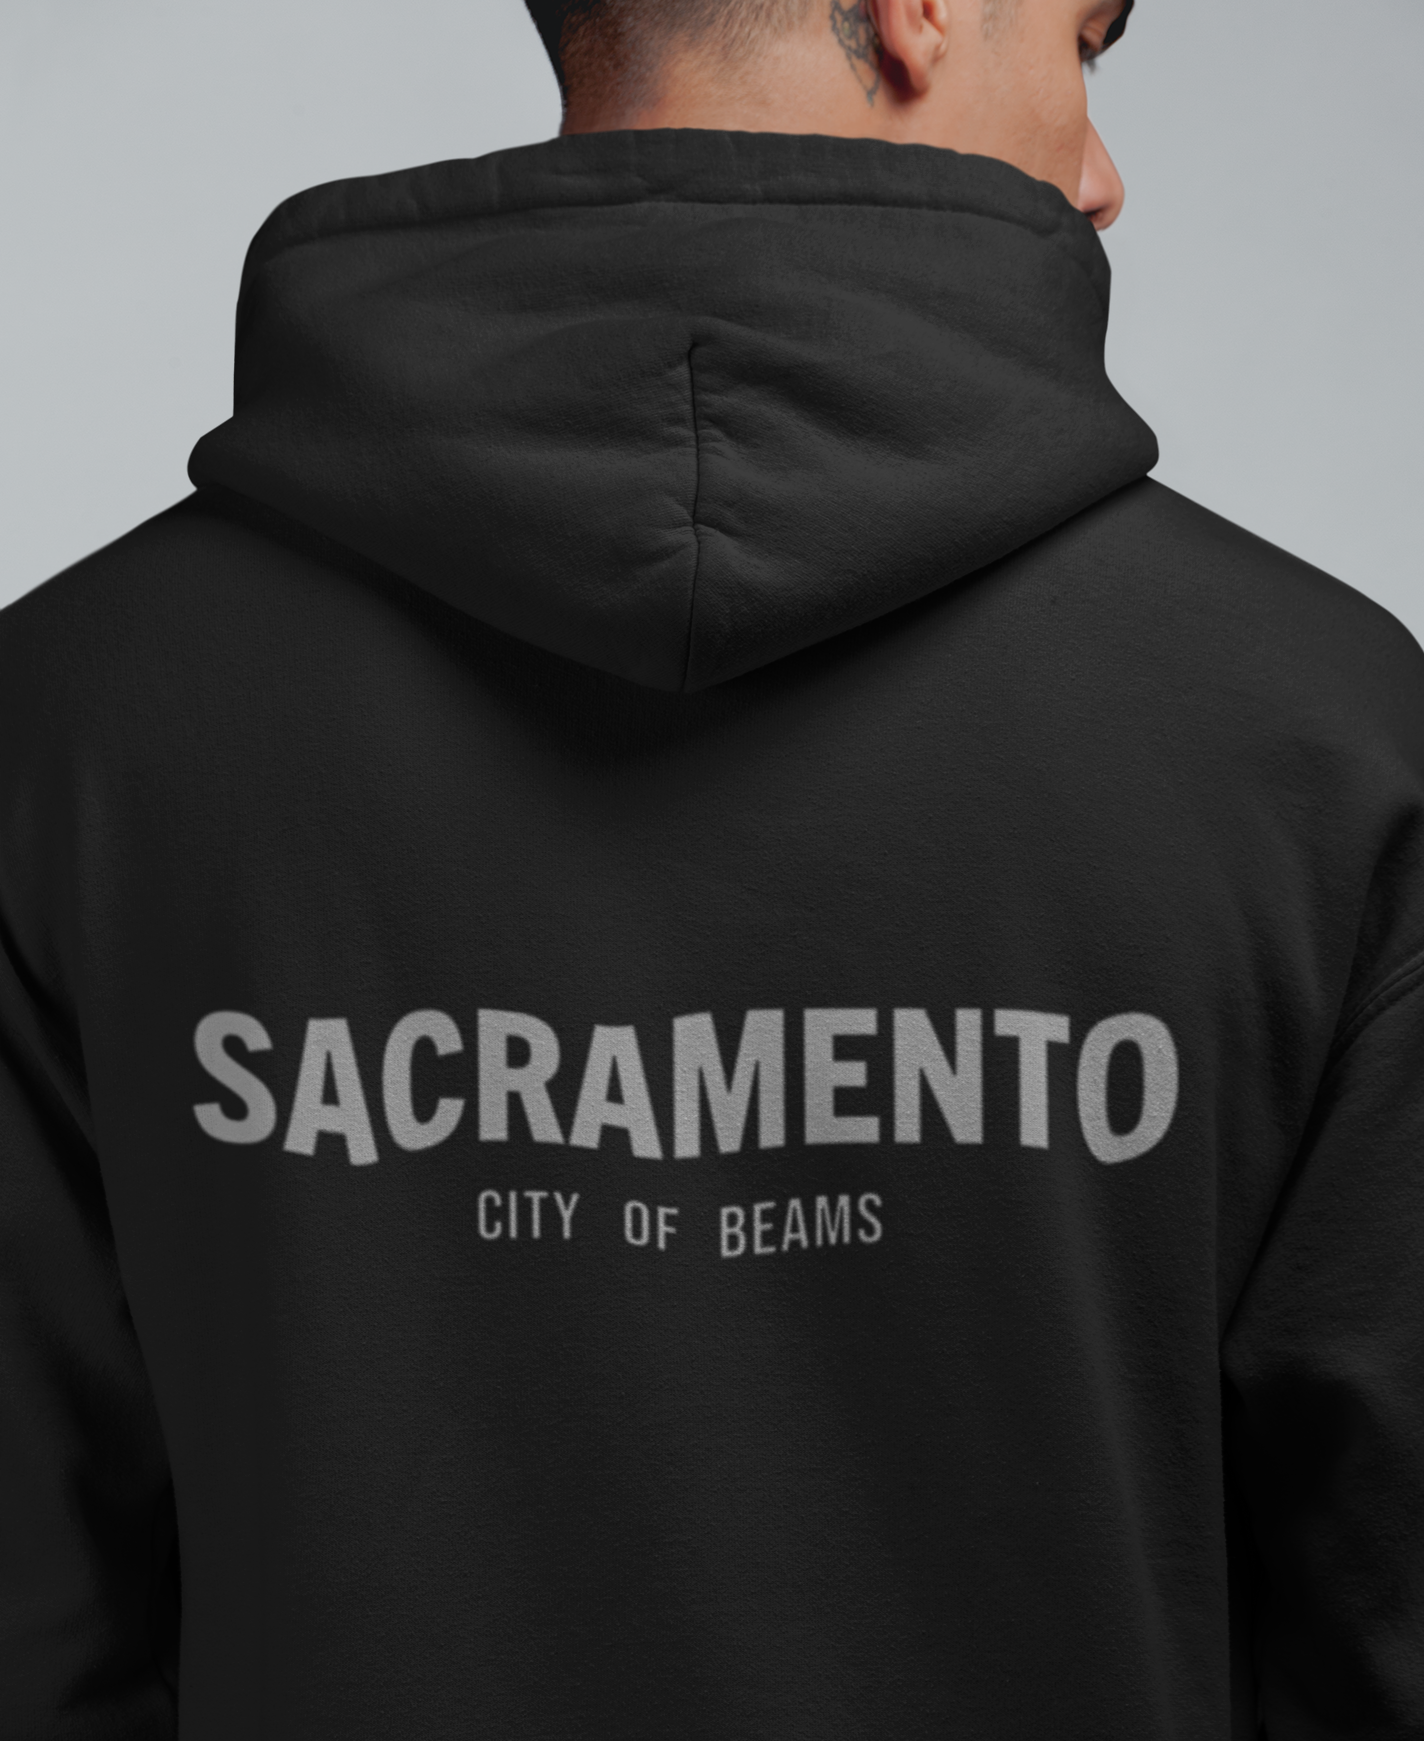 LIMITED EDITION CITY OF BEAMS REFLECTIVE HEAVYWEIGHT HOODIE